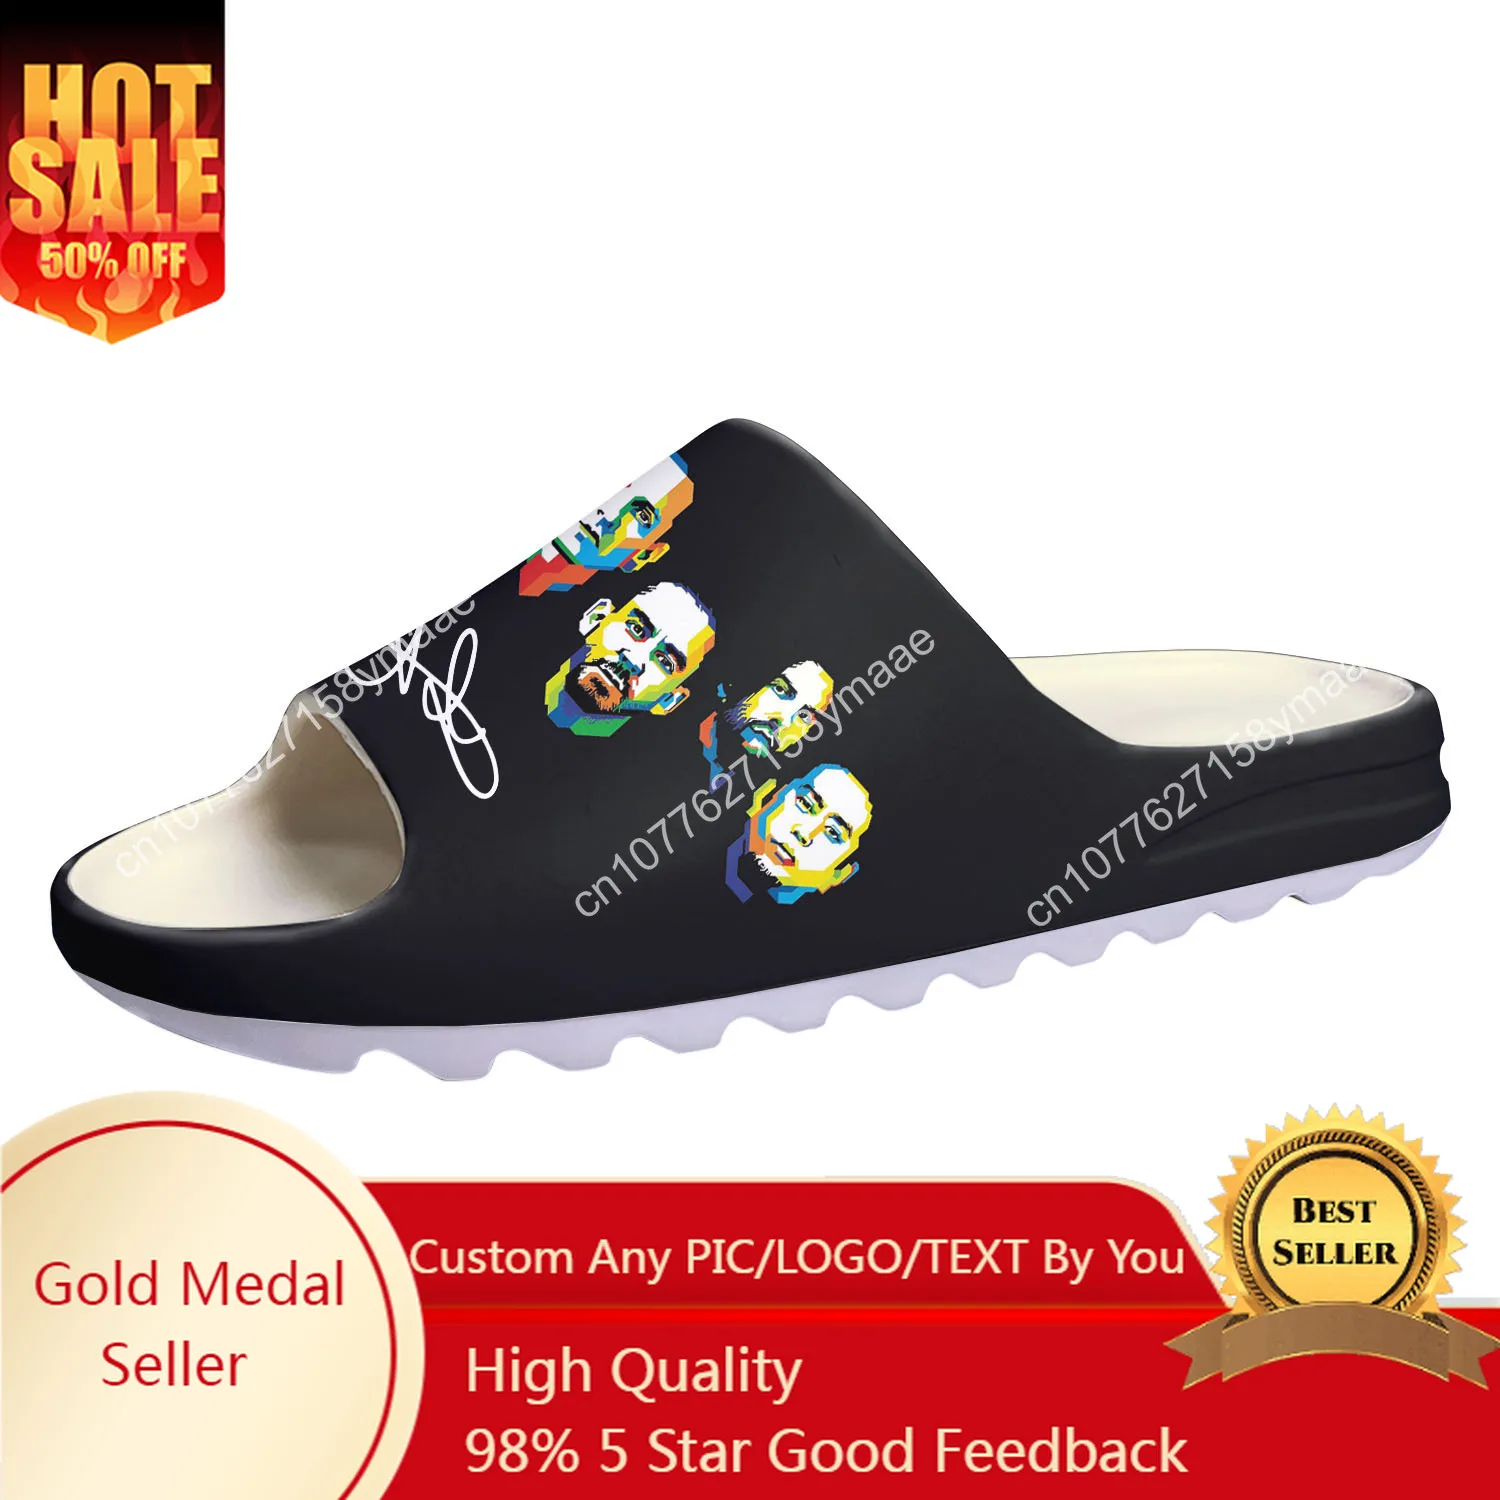 

Chester Park Soft Sole Sllipers Home Clogs Step on Water Shoes Mens Womens Teenager Bathroom Beach Customize on Shit Sandals